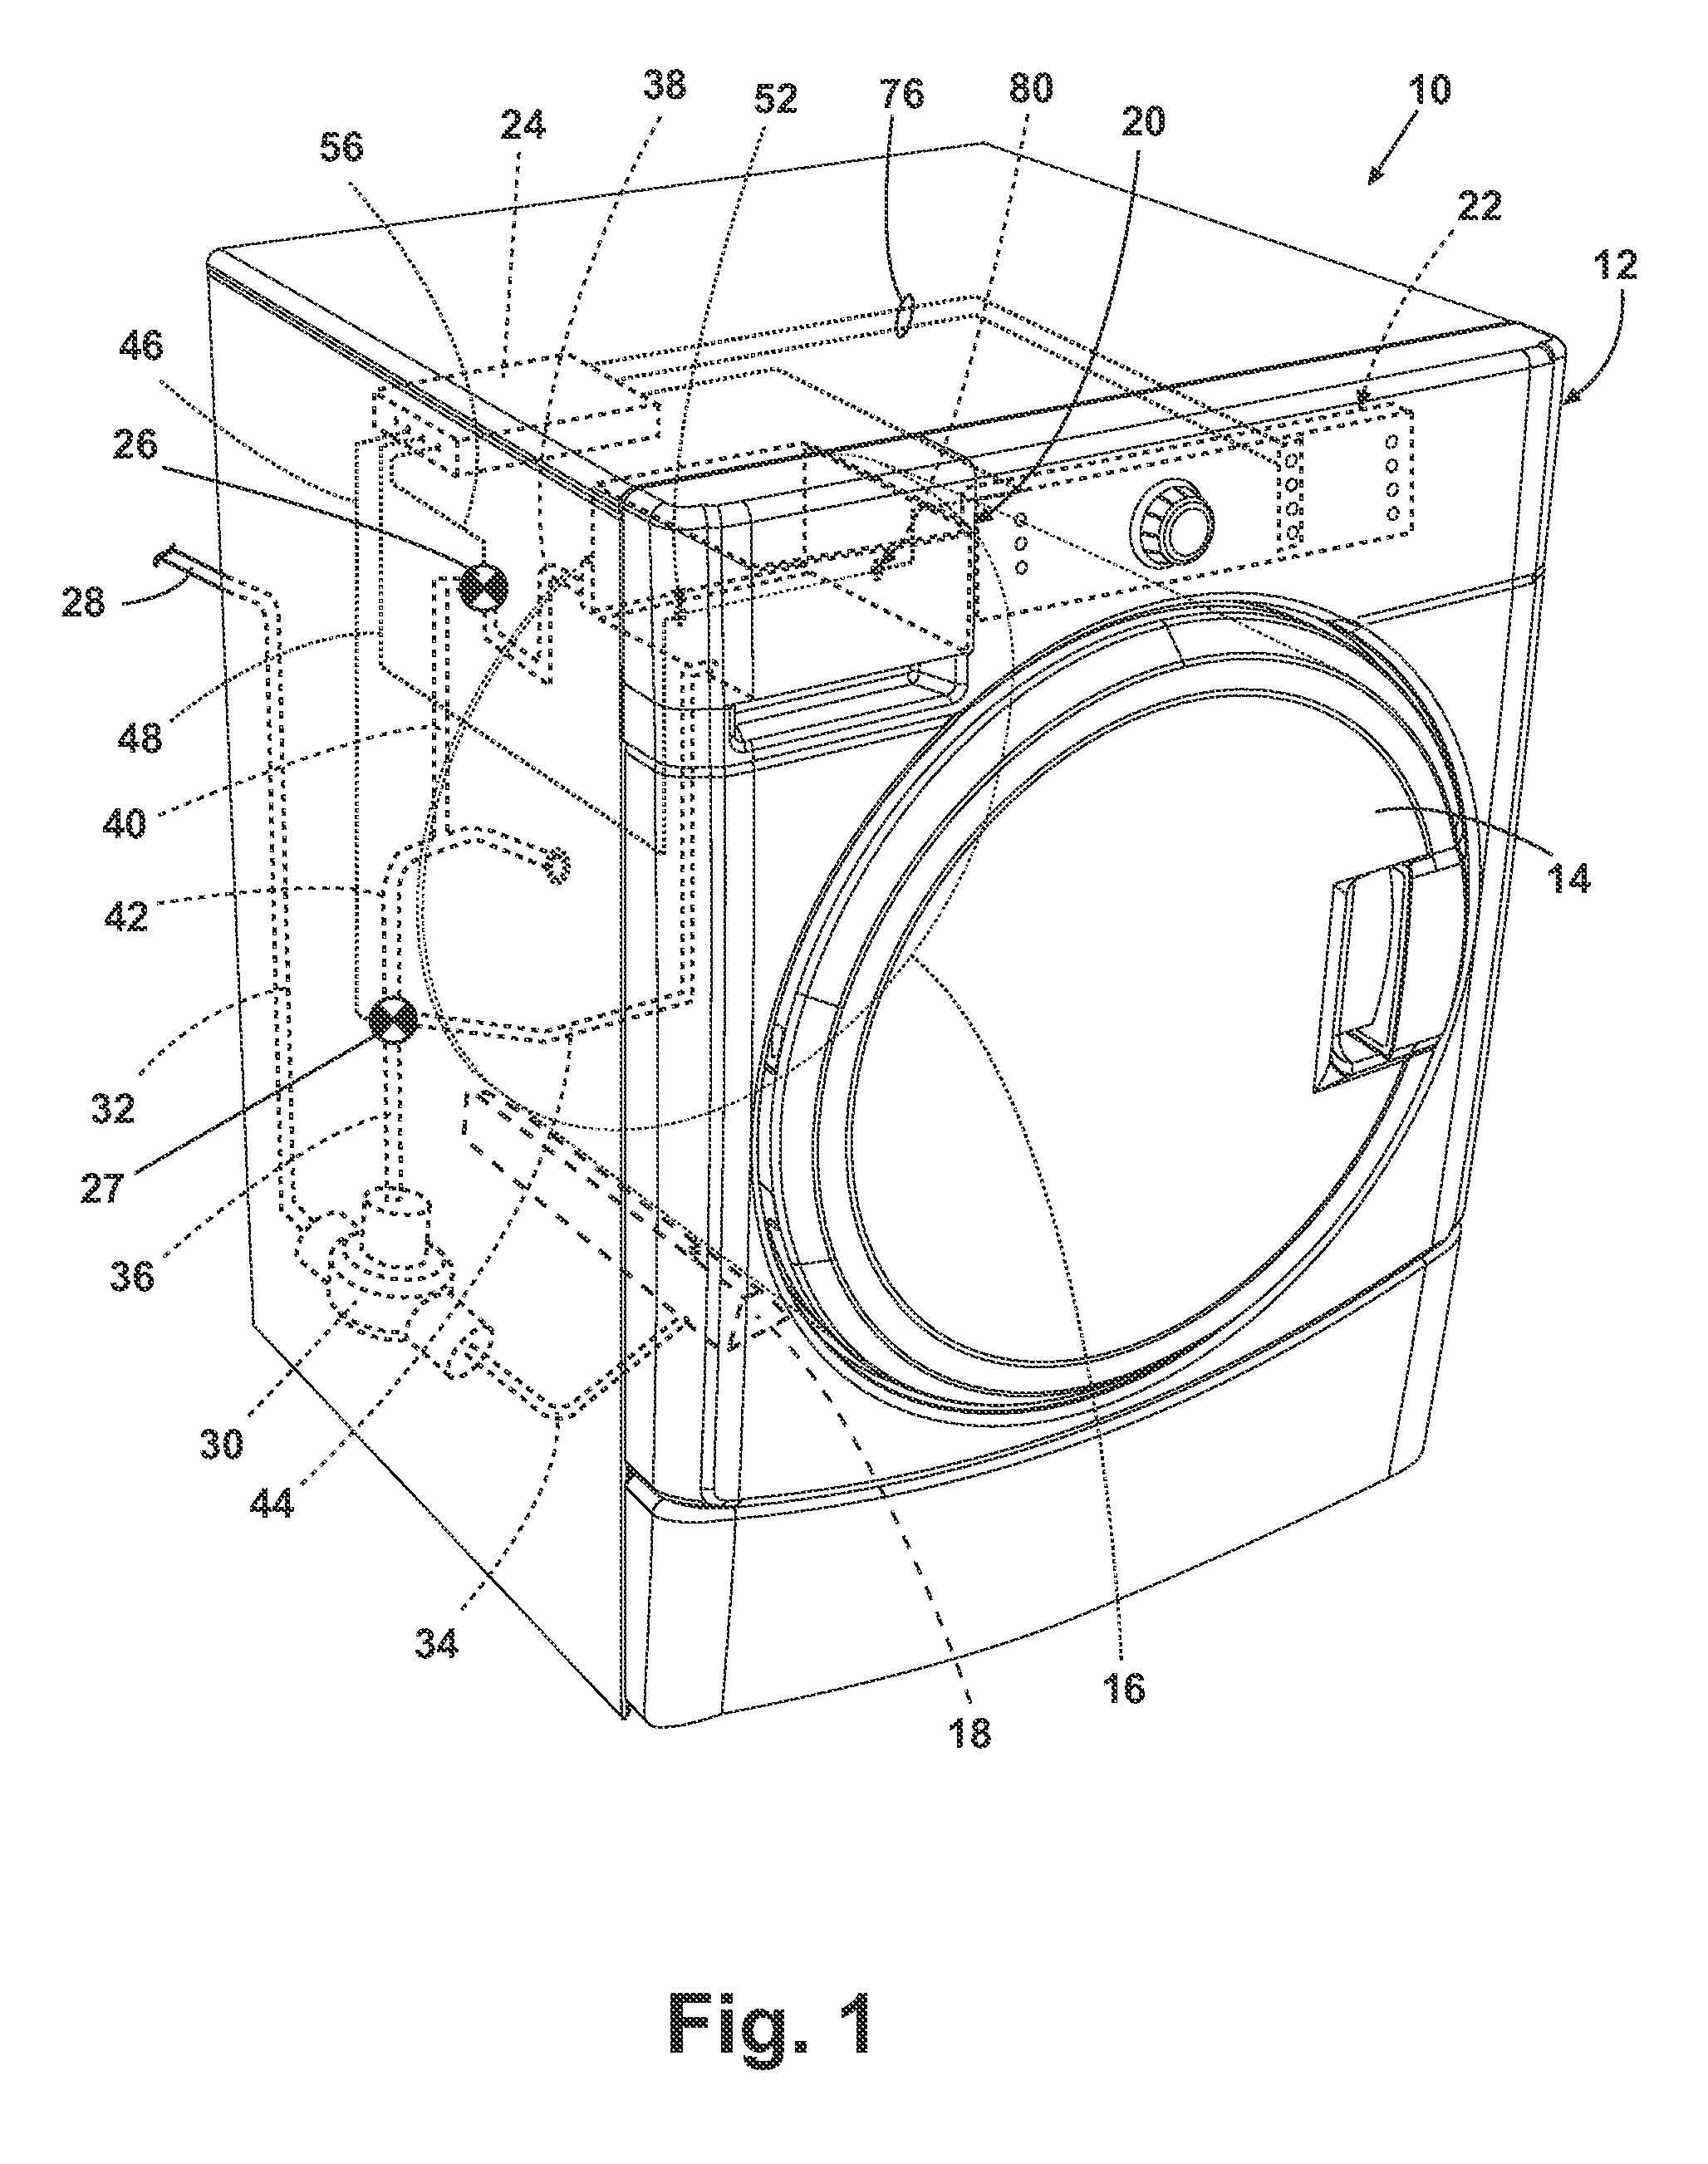 Apparatus and method for controlling laundering cycle by sensing wash aid concentration